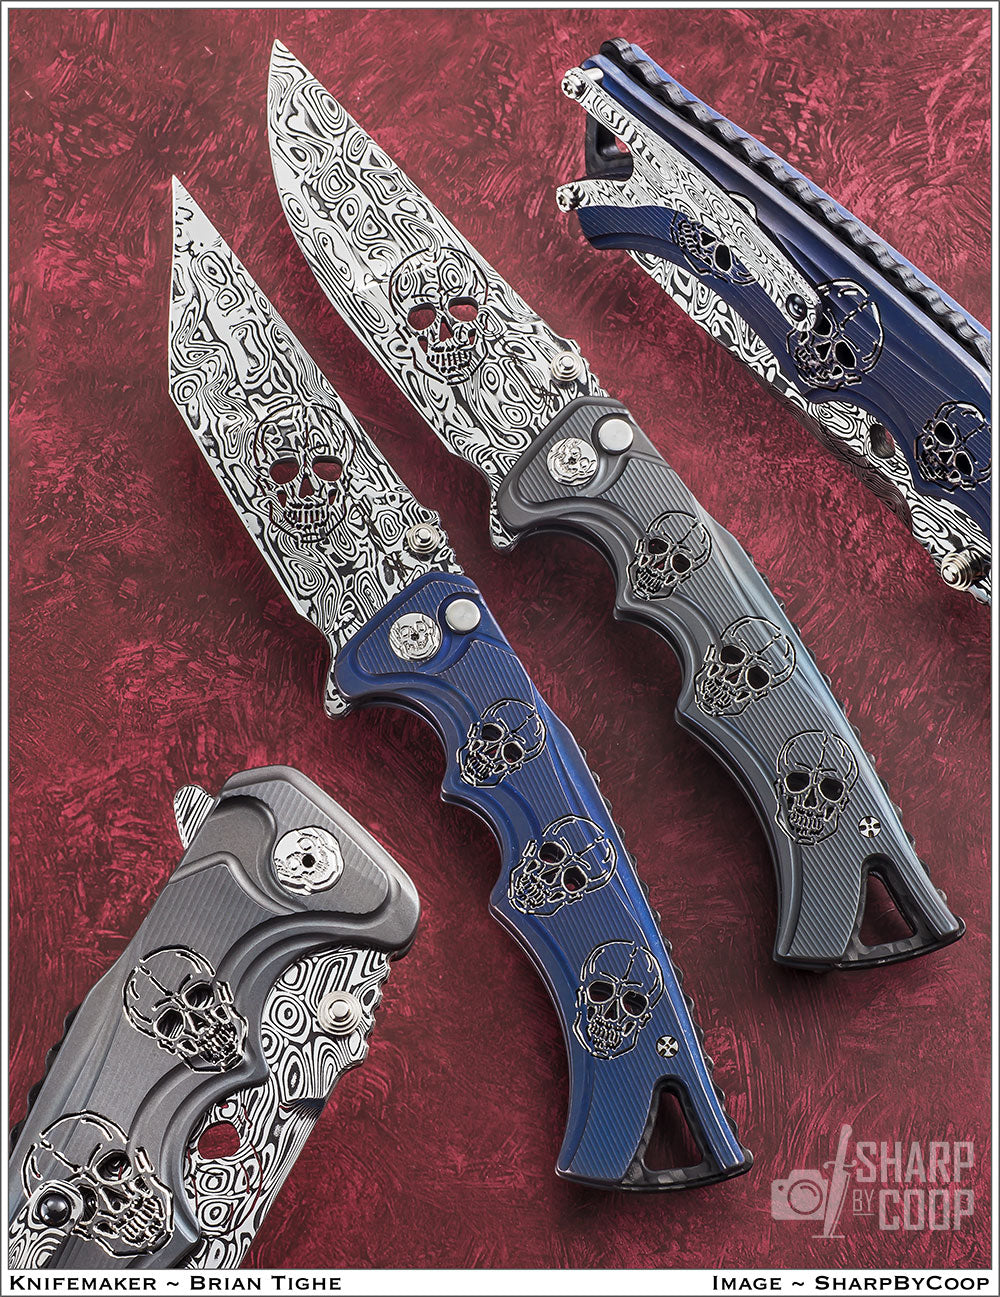 Tighe Fighter With Titanium Scales and Damasteel Blade and Clip with Pierced and Engraved Skulls.